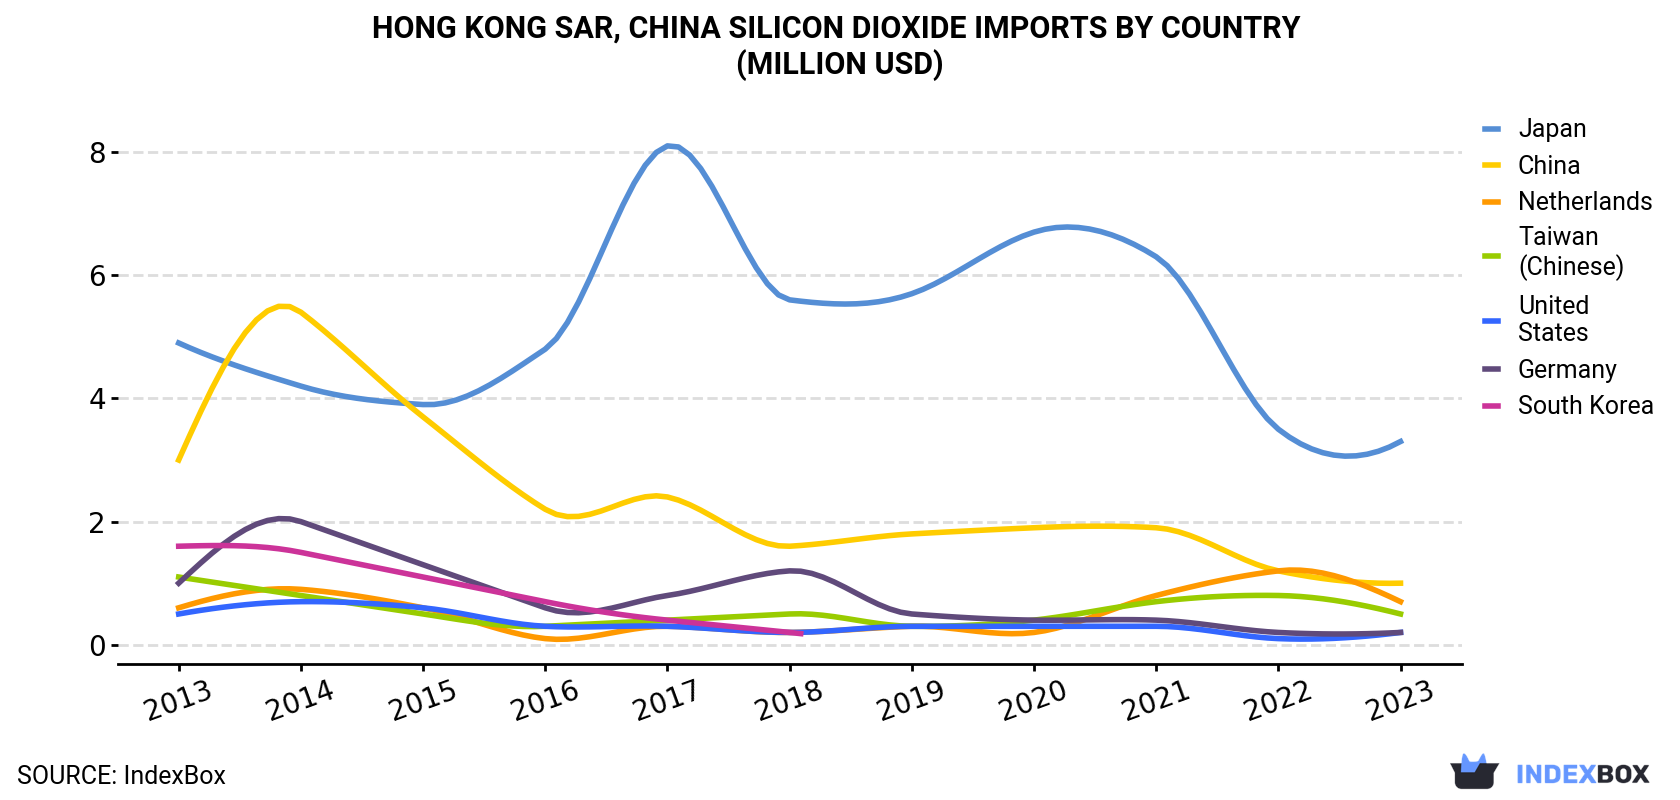 Hong Kong Silicon Dioxide Imports By Country (Million USD)